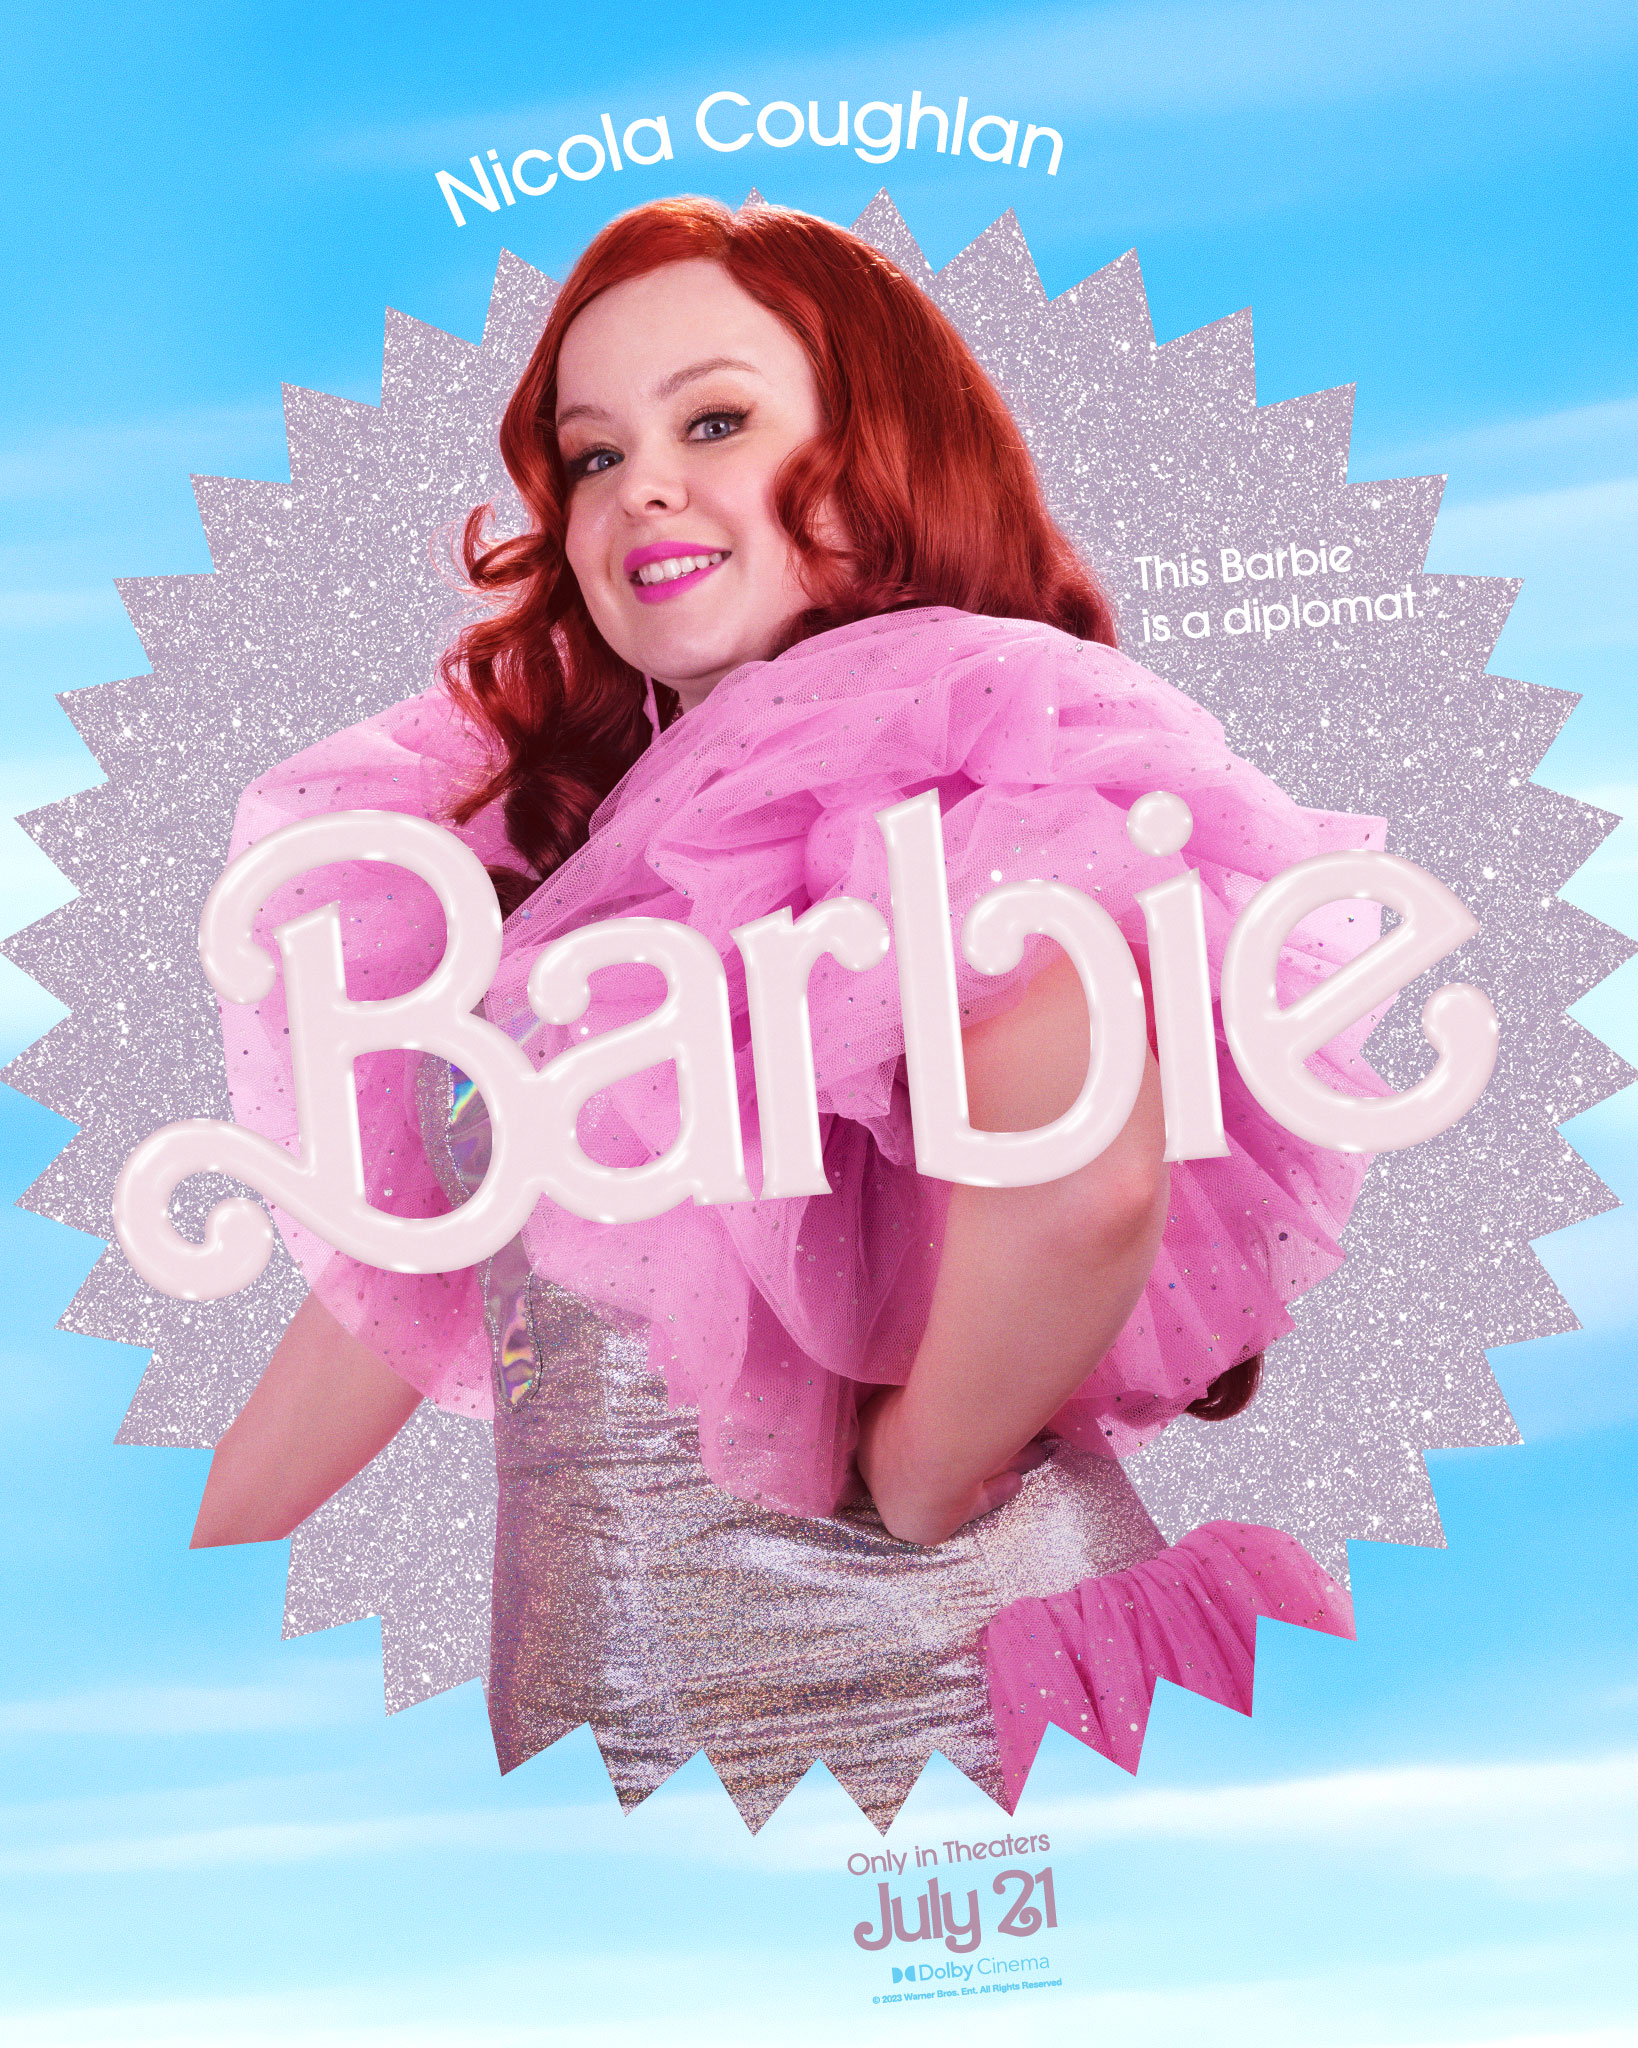 Nicola as Barbie in a movie promotional poster